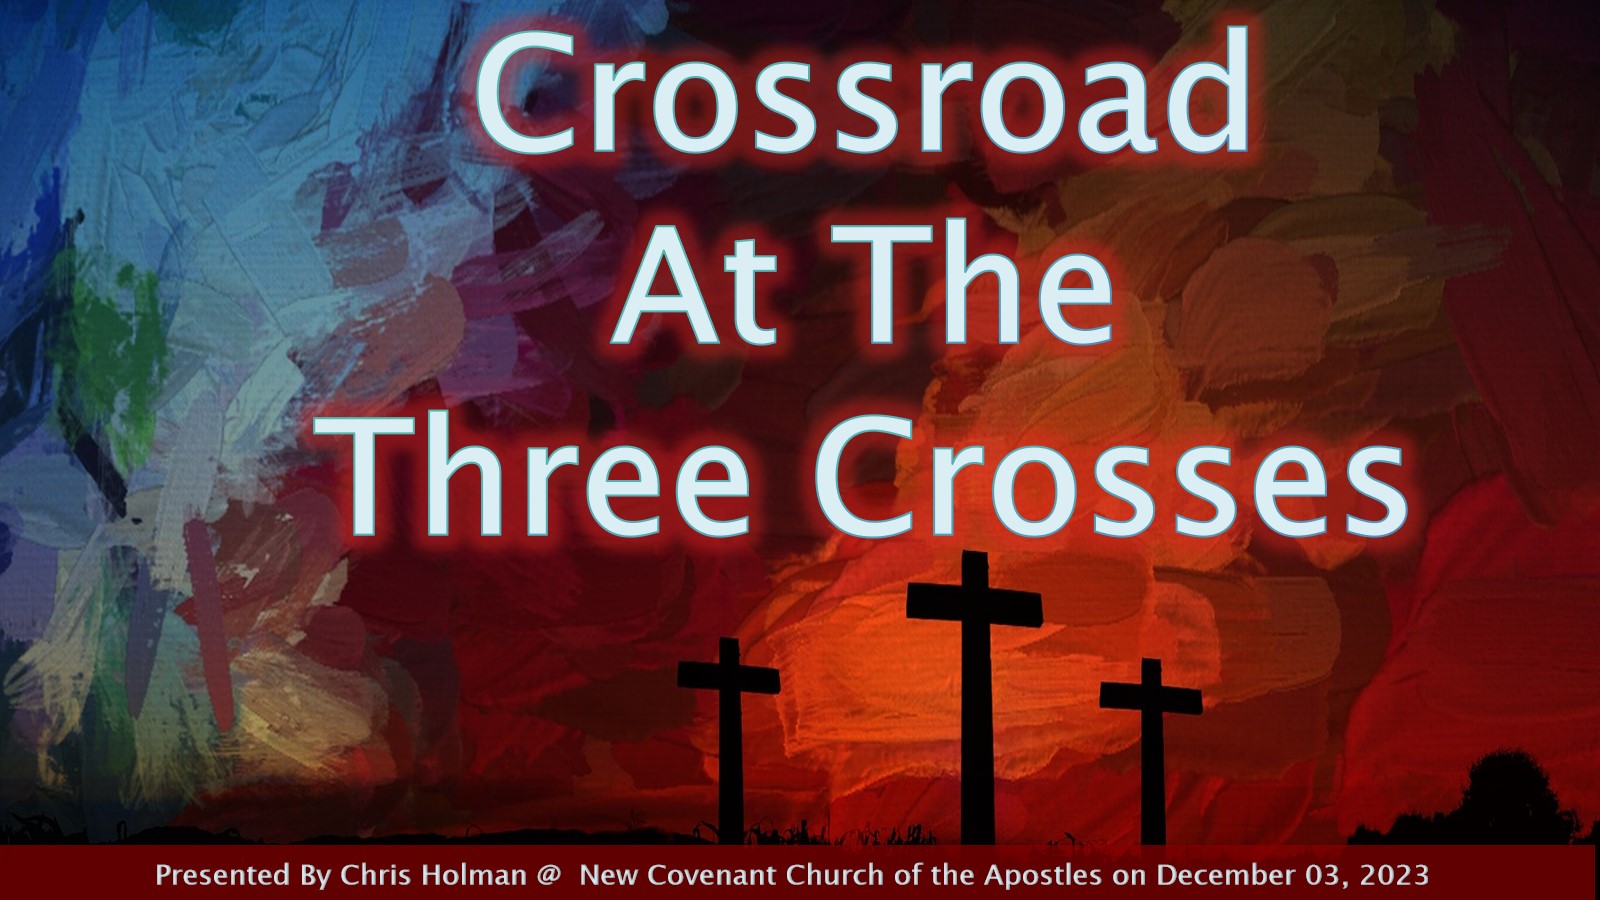 The Crossroad at the Three Crosses